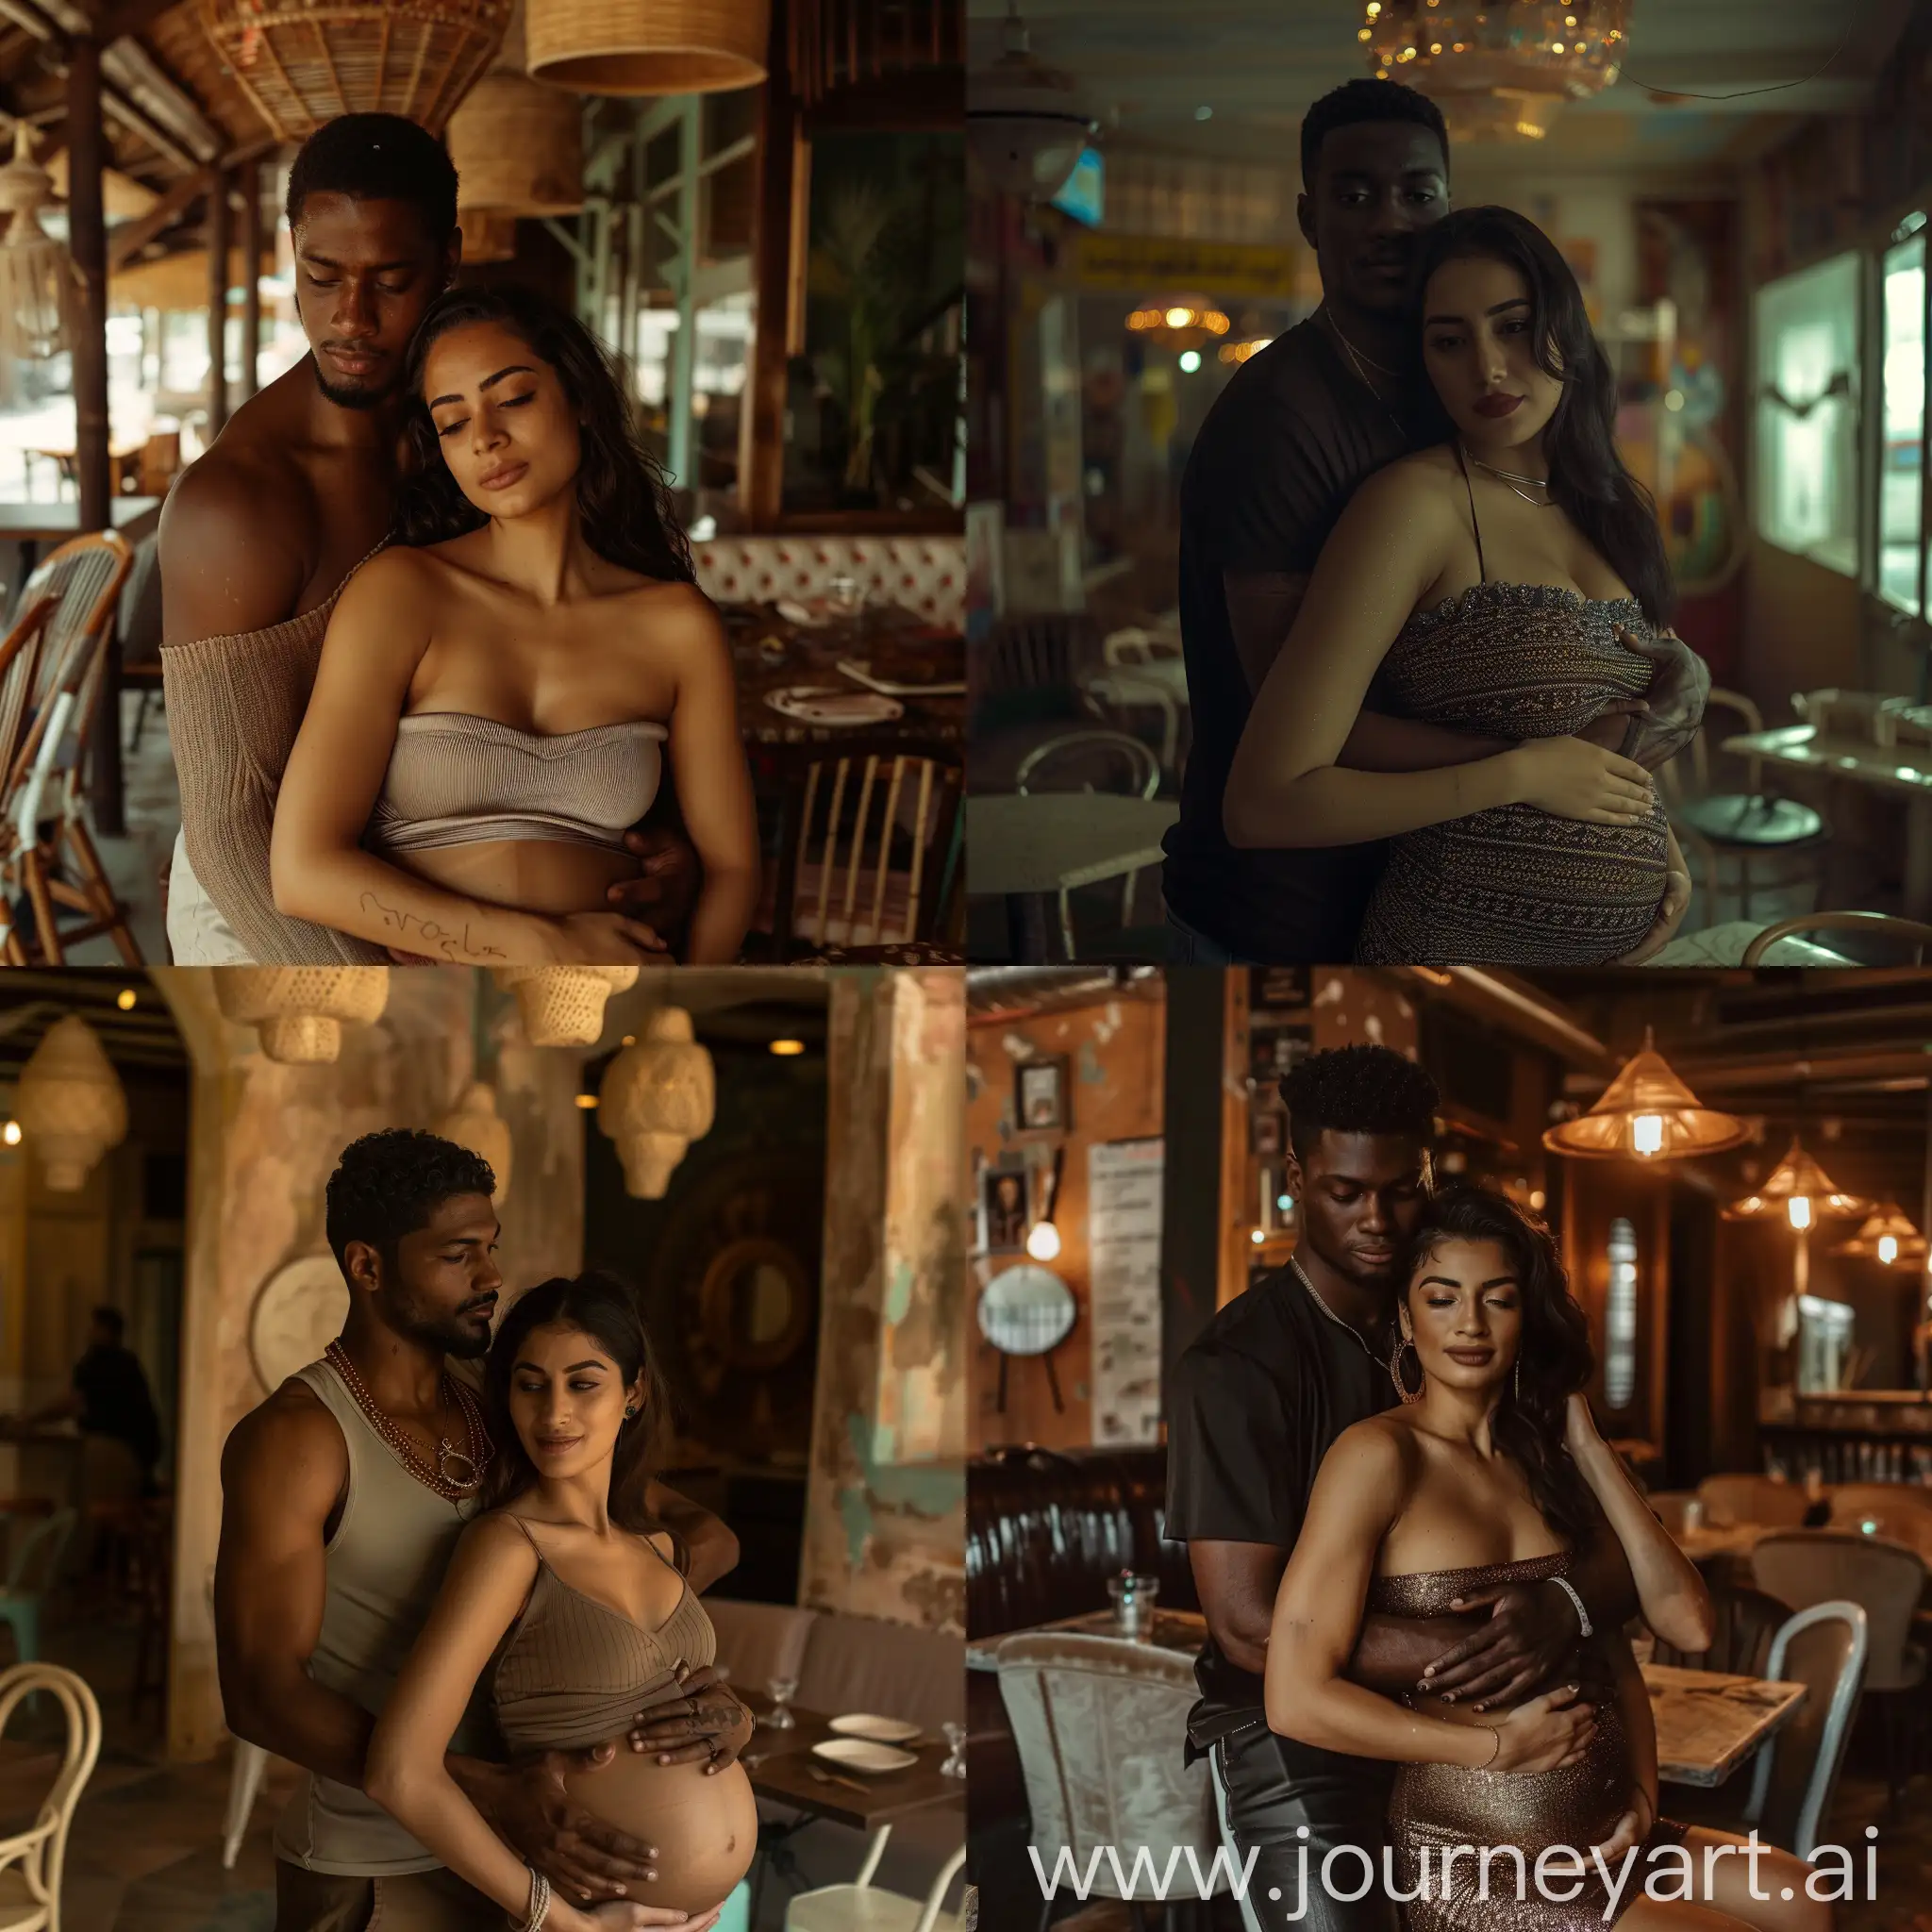 Romantic-Iraqi-Woman-and-African-Partner-Embrace-in-Open-Restaurant-Setting